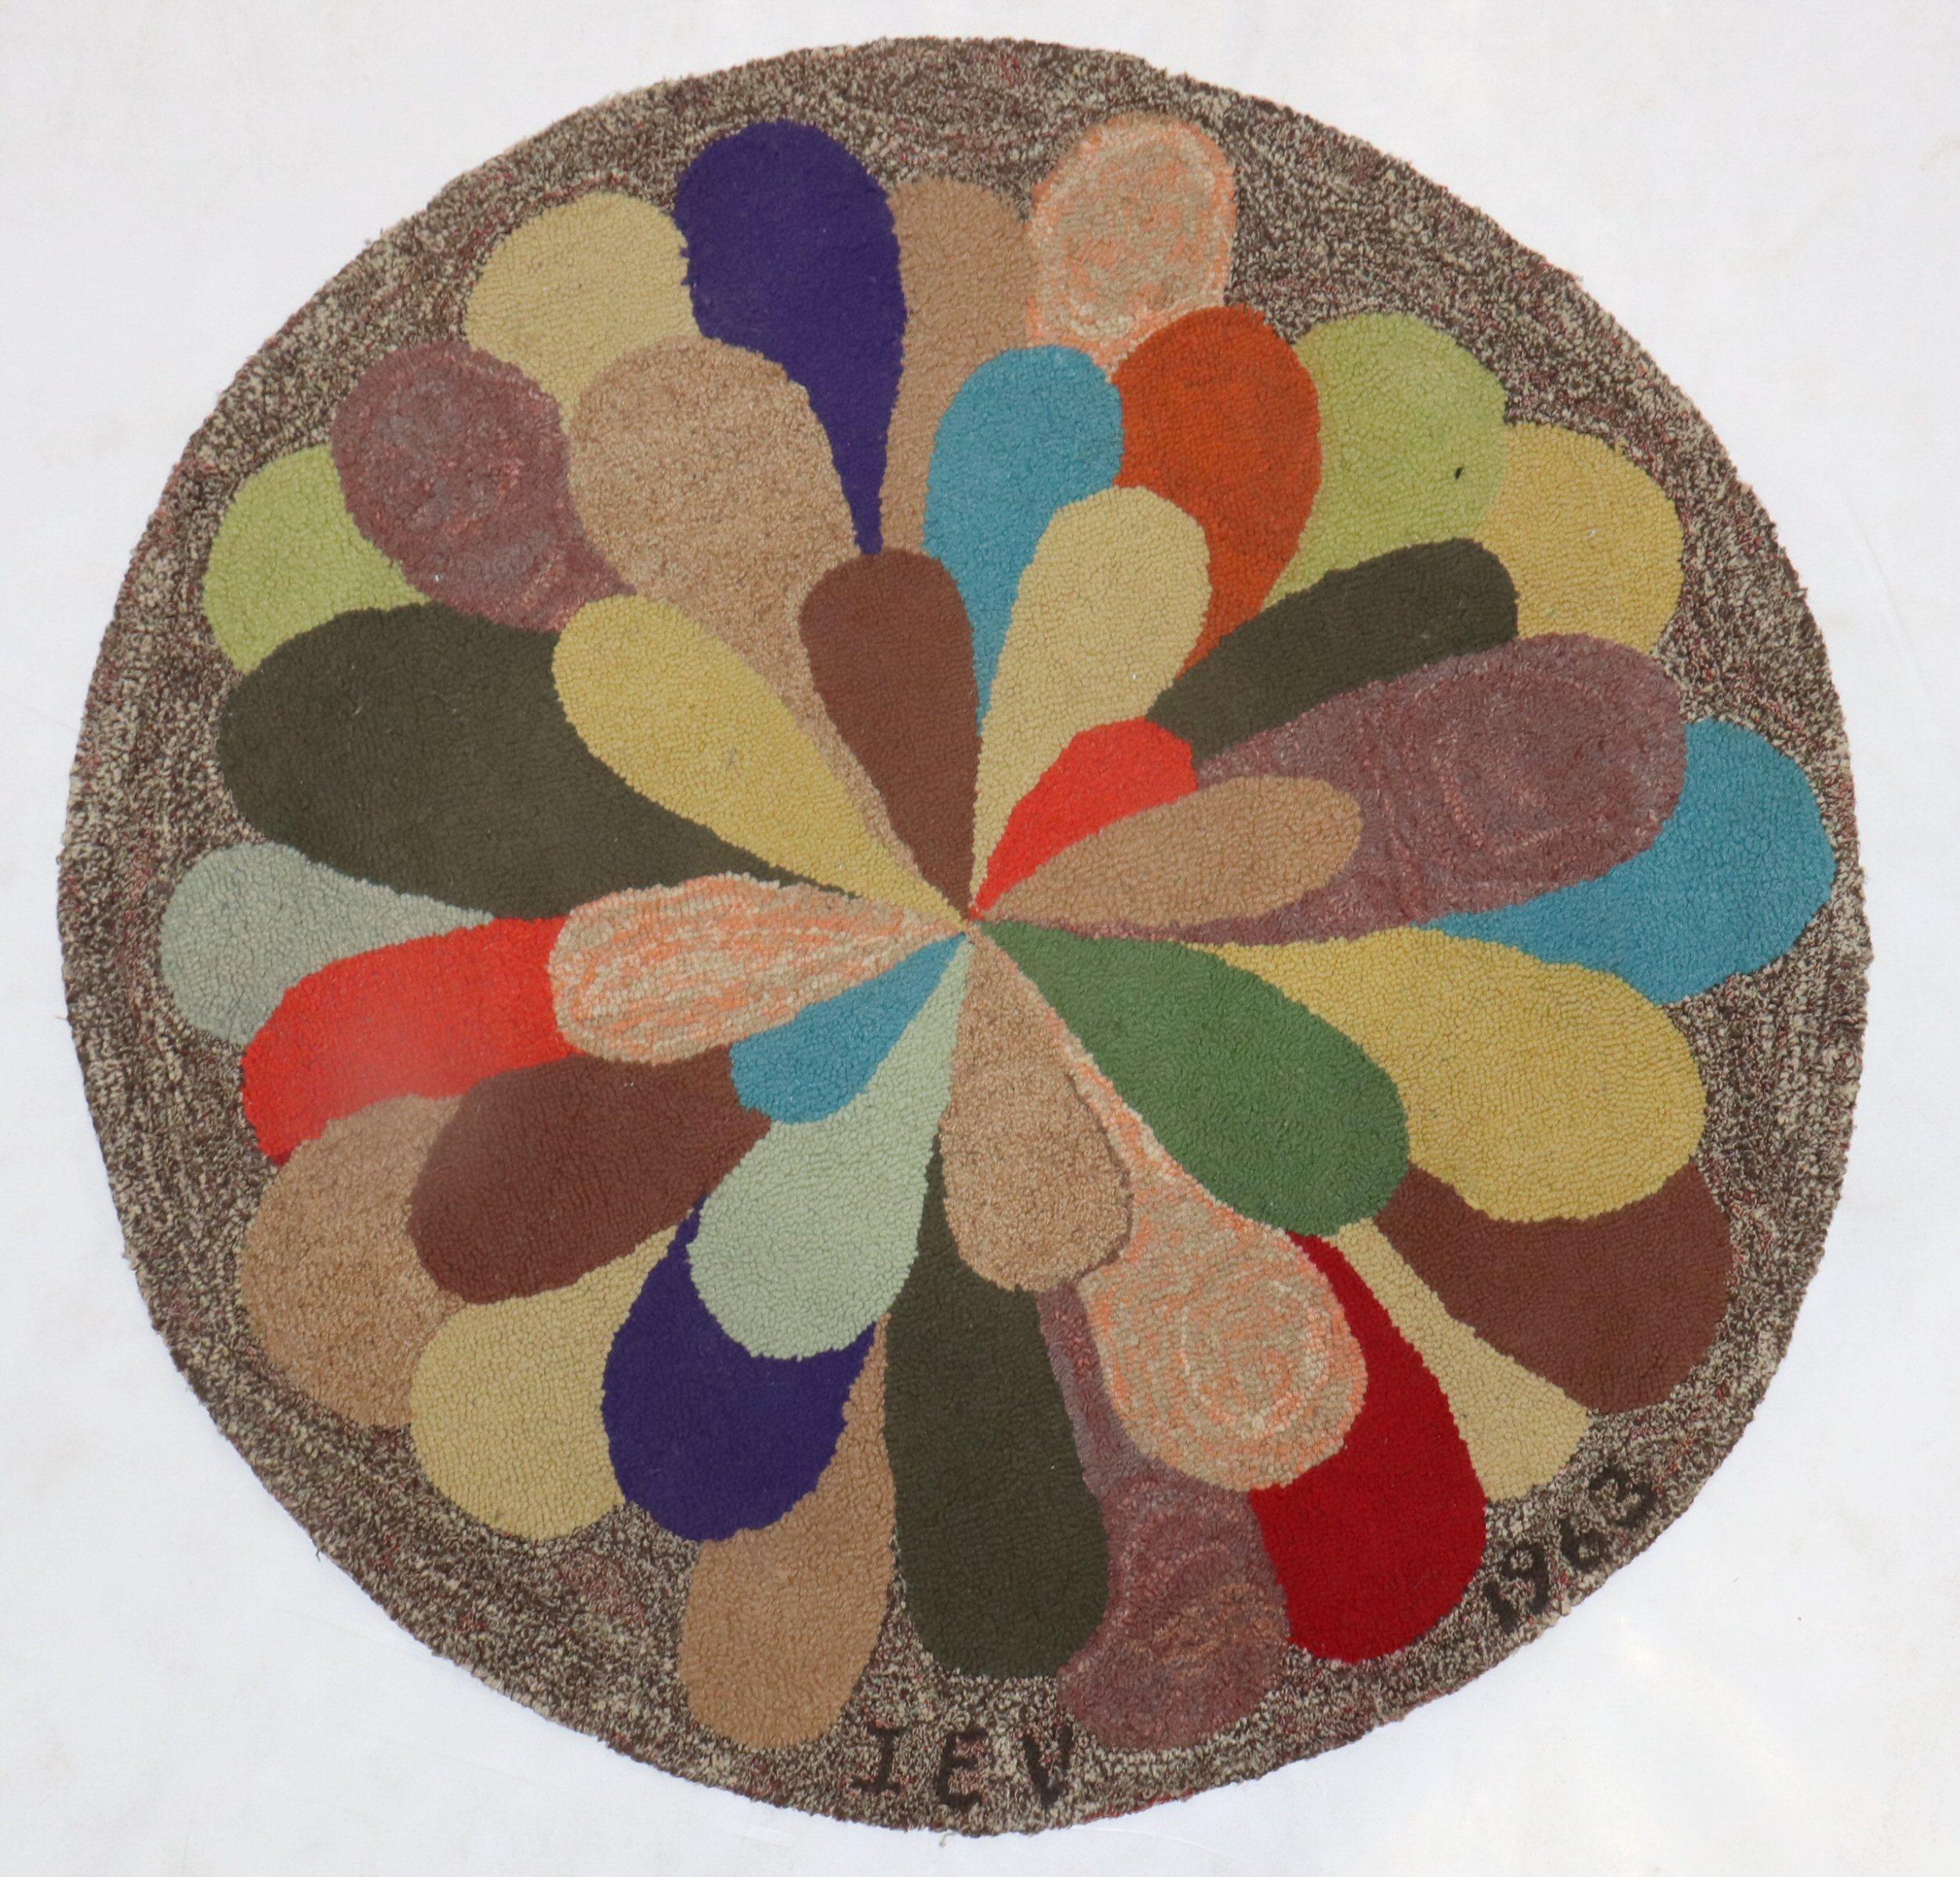 Rare American Hooked rug with a happy colorful motif. Dated 1963 and initialized IEV. Not sure whose name is in the initials

Measure: 30'' round.